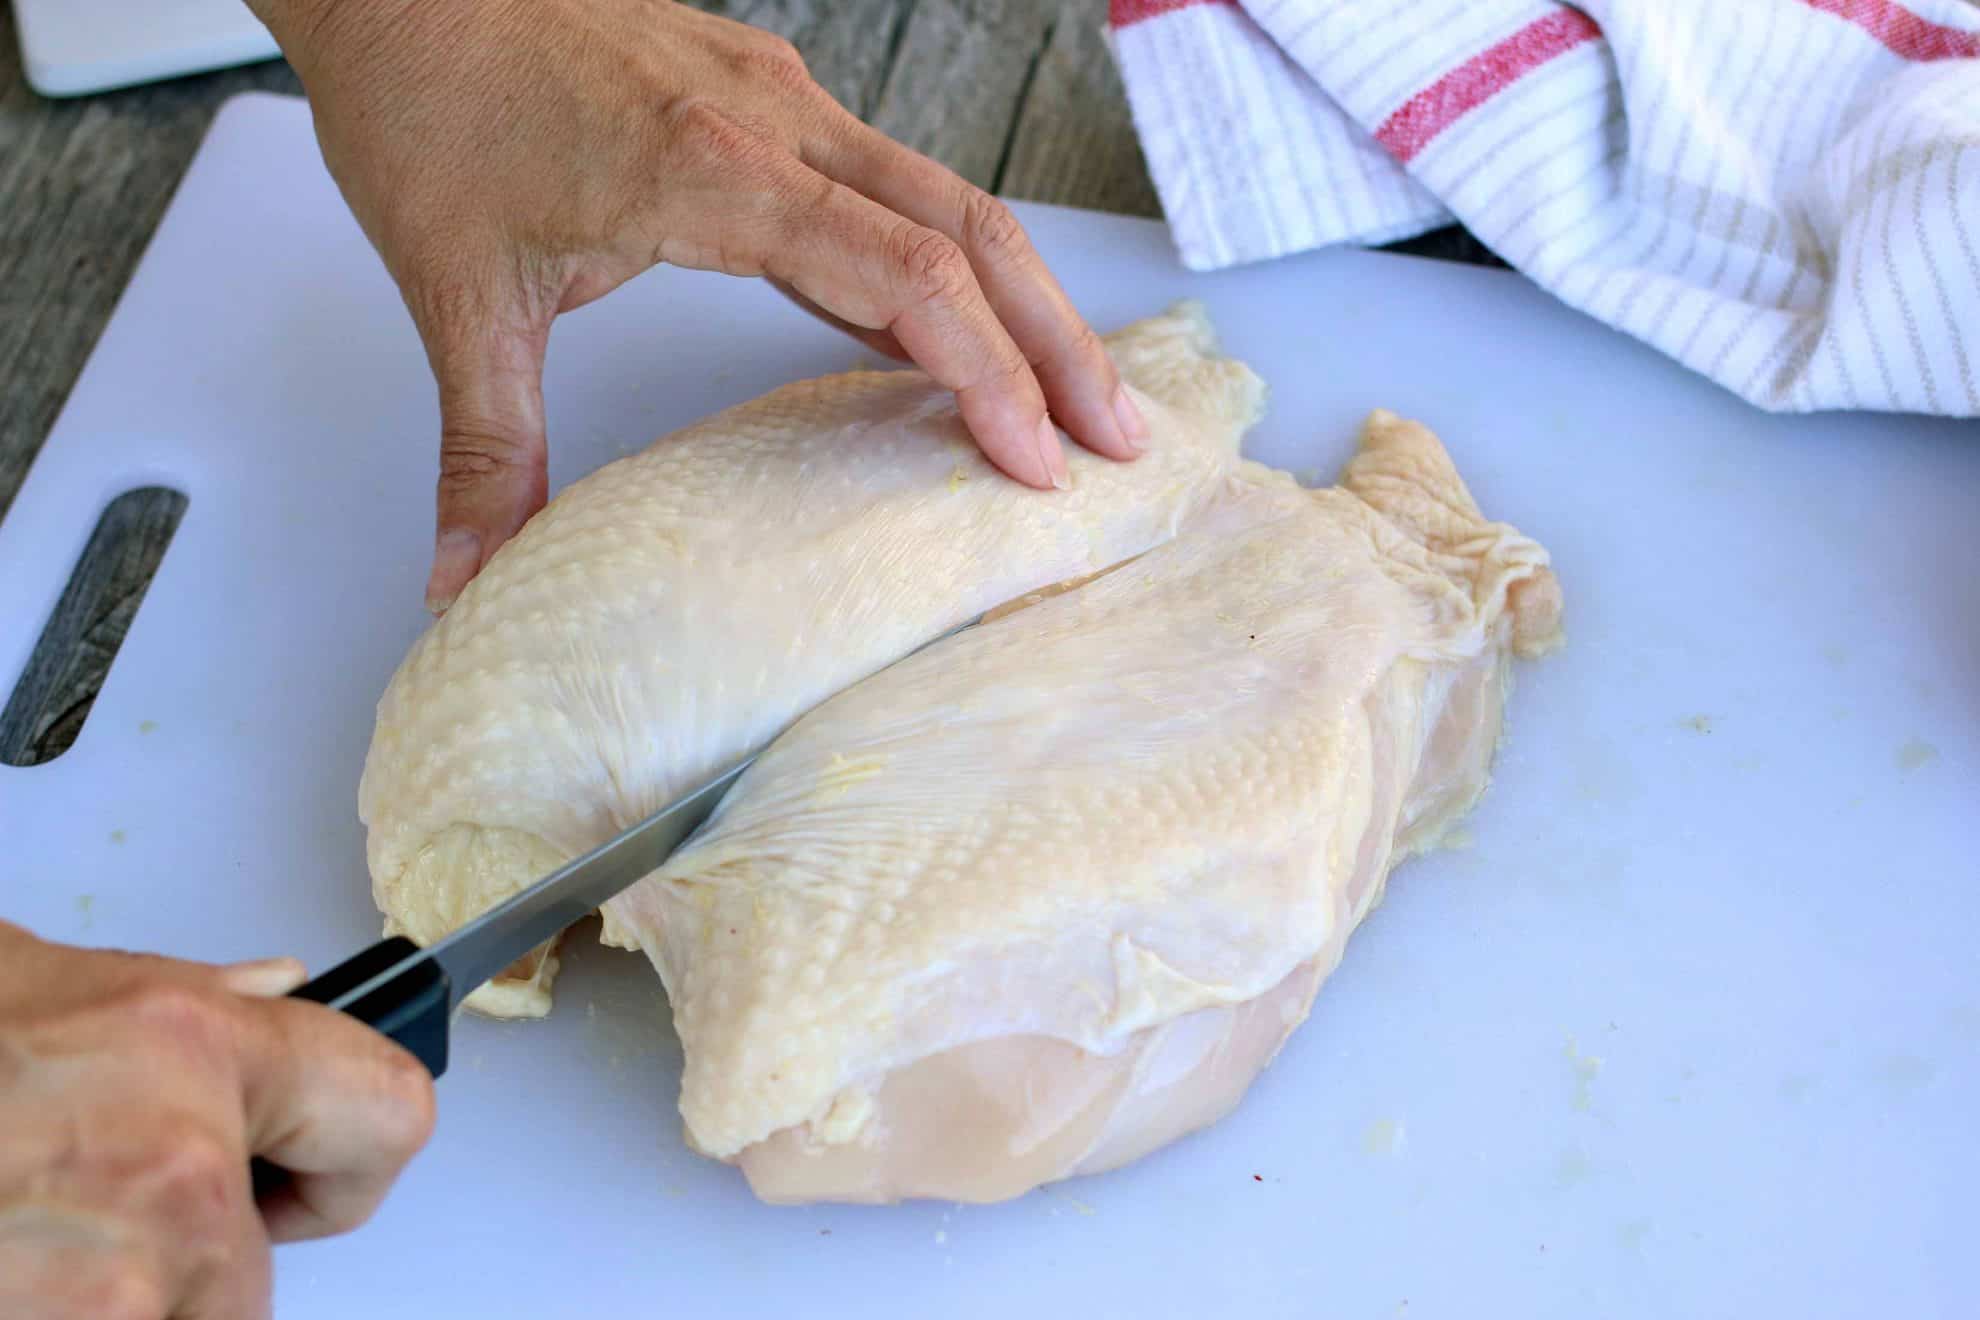 Keel bone removed from the breast of a whole chicken.